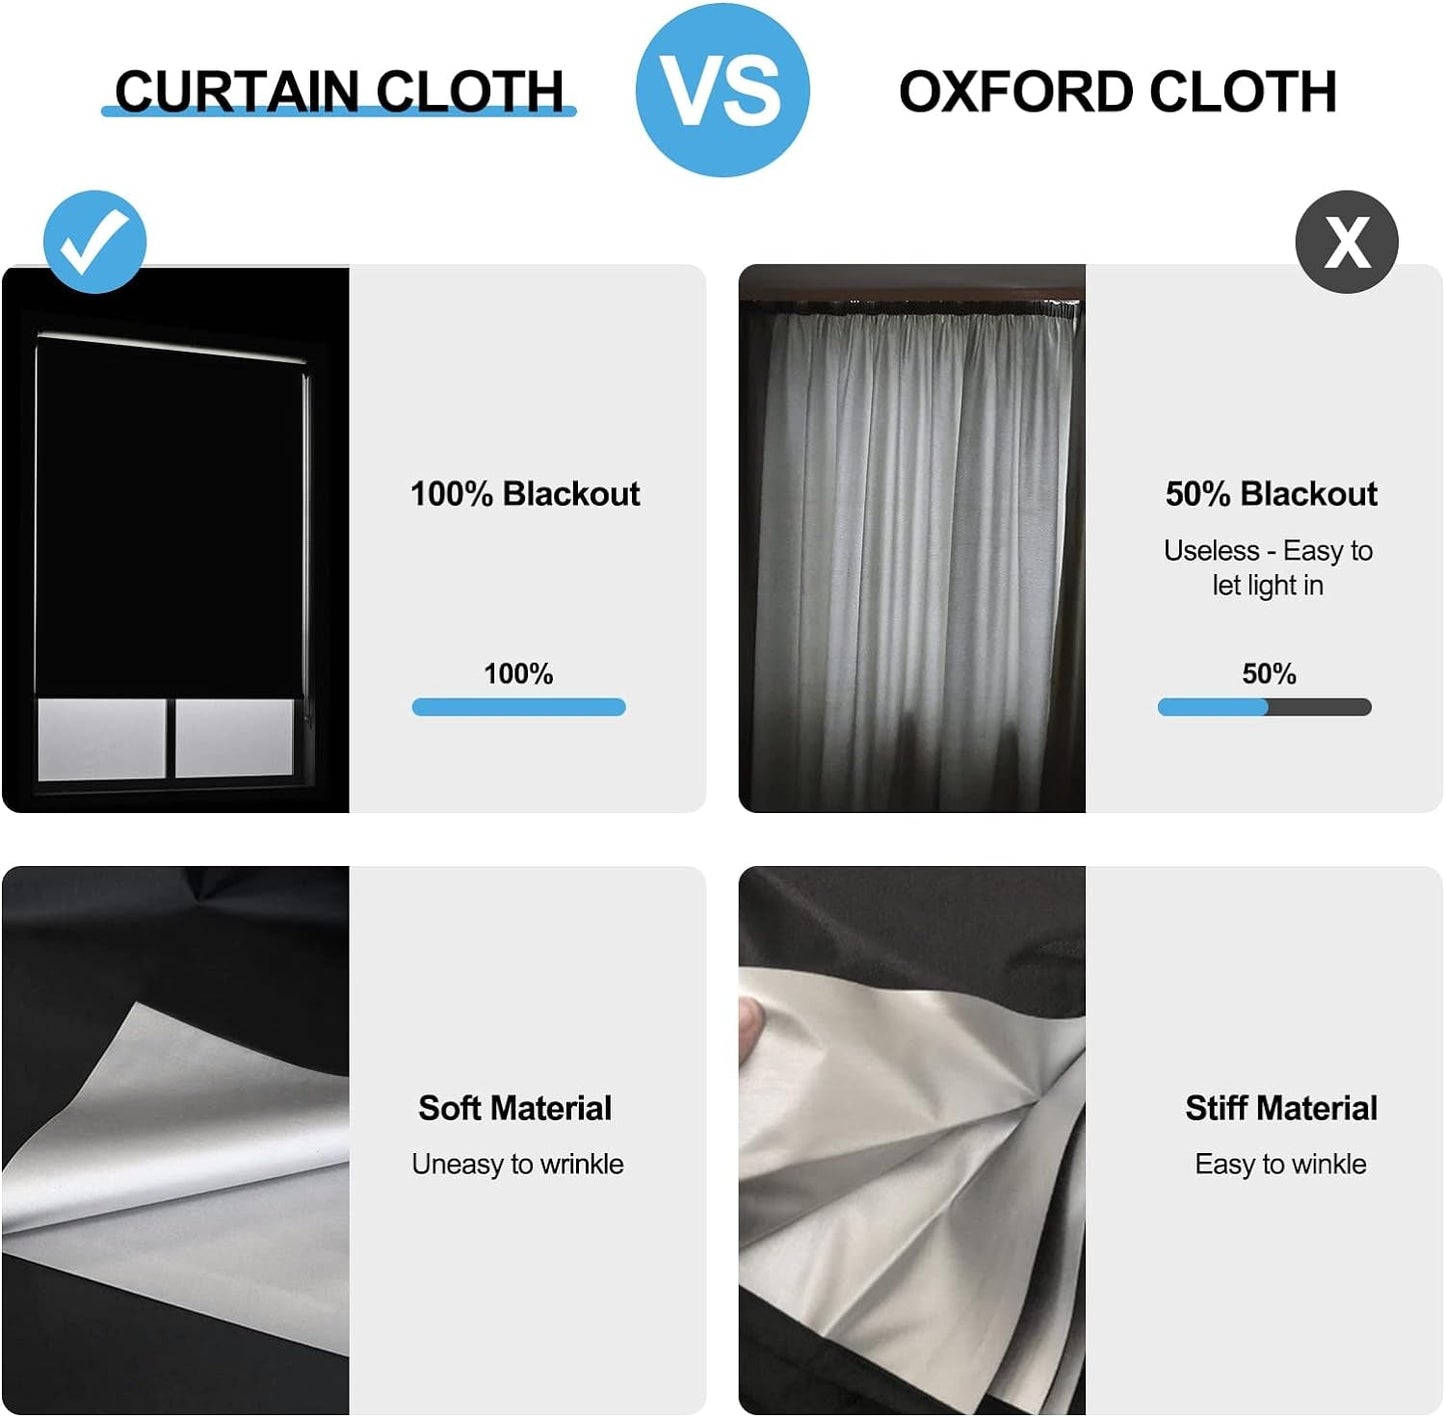 Blackout Blinds 100% Blackout Material, Portable Blackout Shades 145X200Cm, DIY Cut to Any Size or Shape Blackout Blinds for Windows Bedroom Nursery Loft Travel RV Car